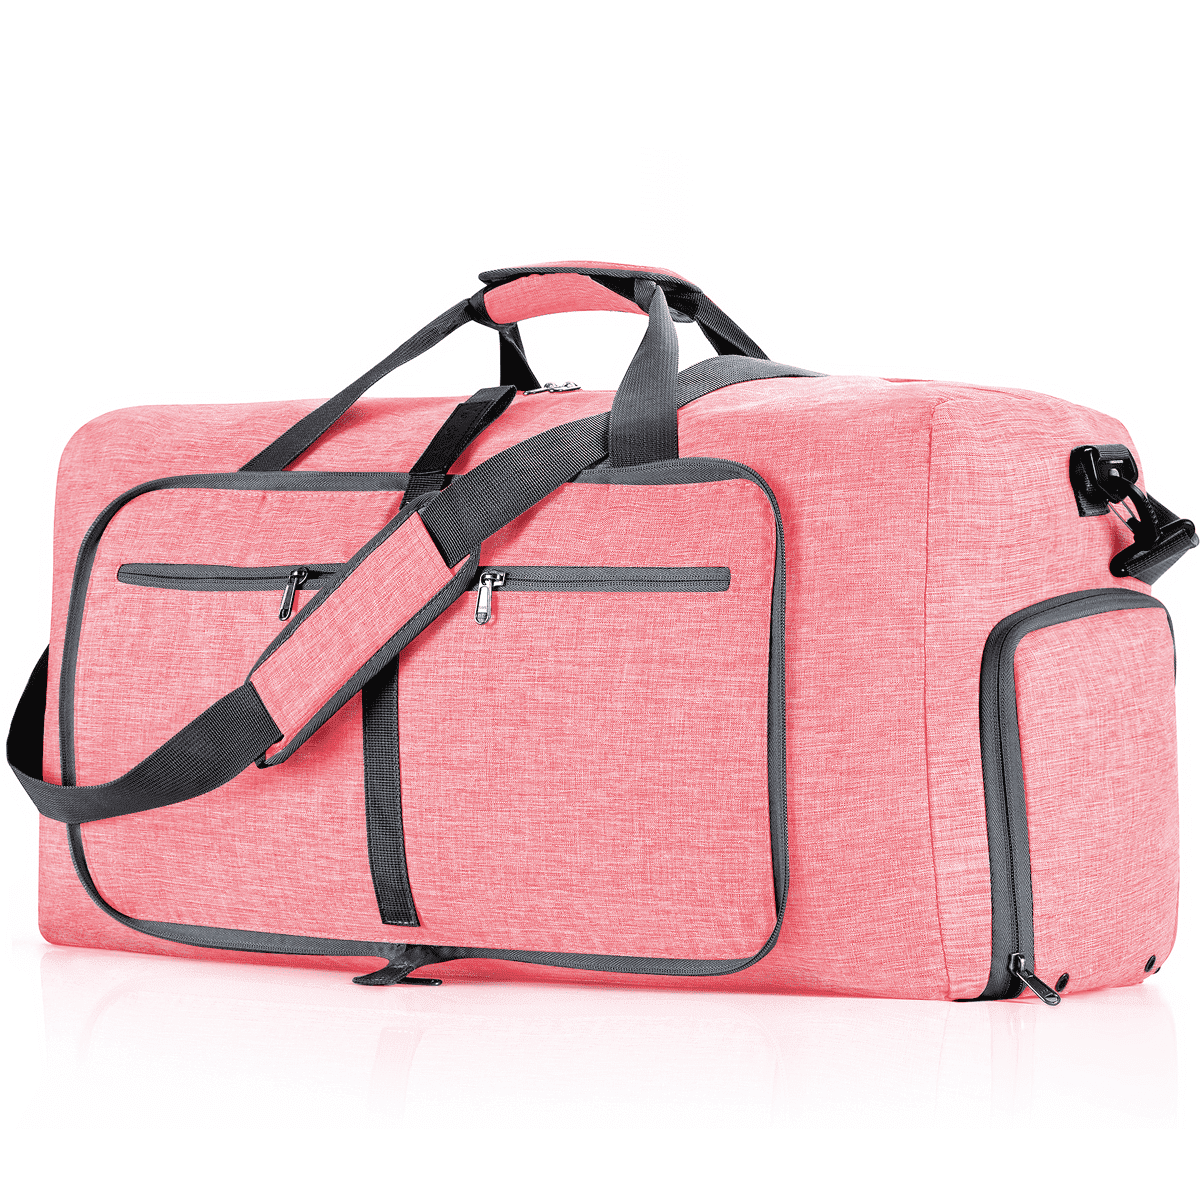 65L Foldable Duffel Bag Women, 24" Travel Bag with Shoes Compartment, Weekender Bag for Women with Trolley Sleeve for Men and Women Waterproof & Tear Resistant, Large Duffle Bag for Travel, Pink